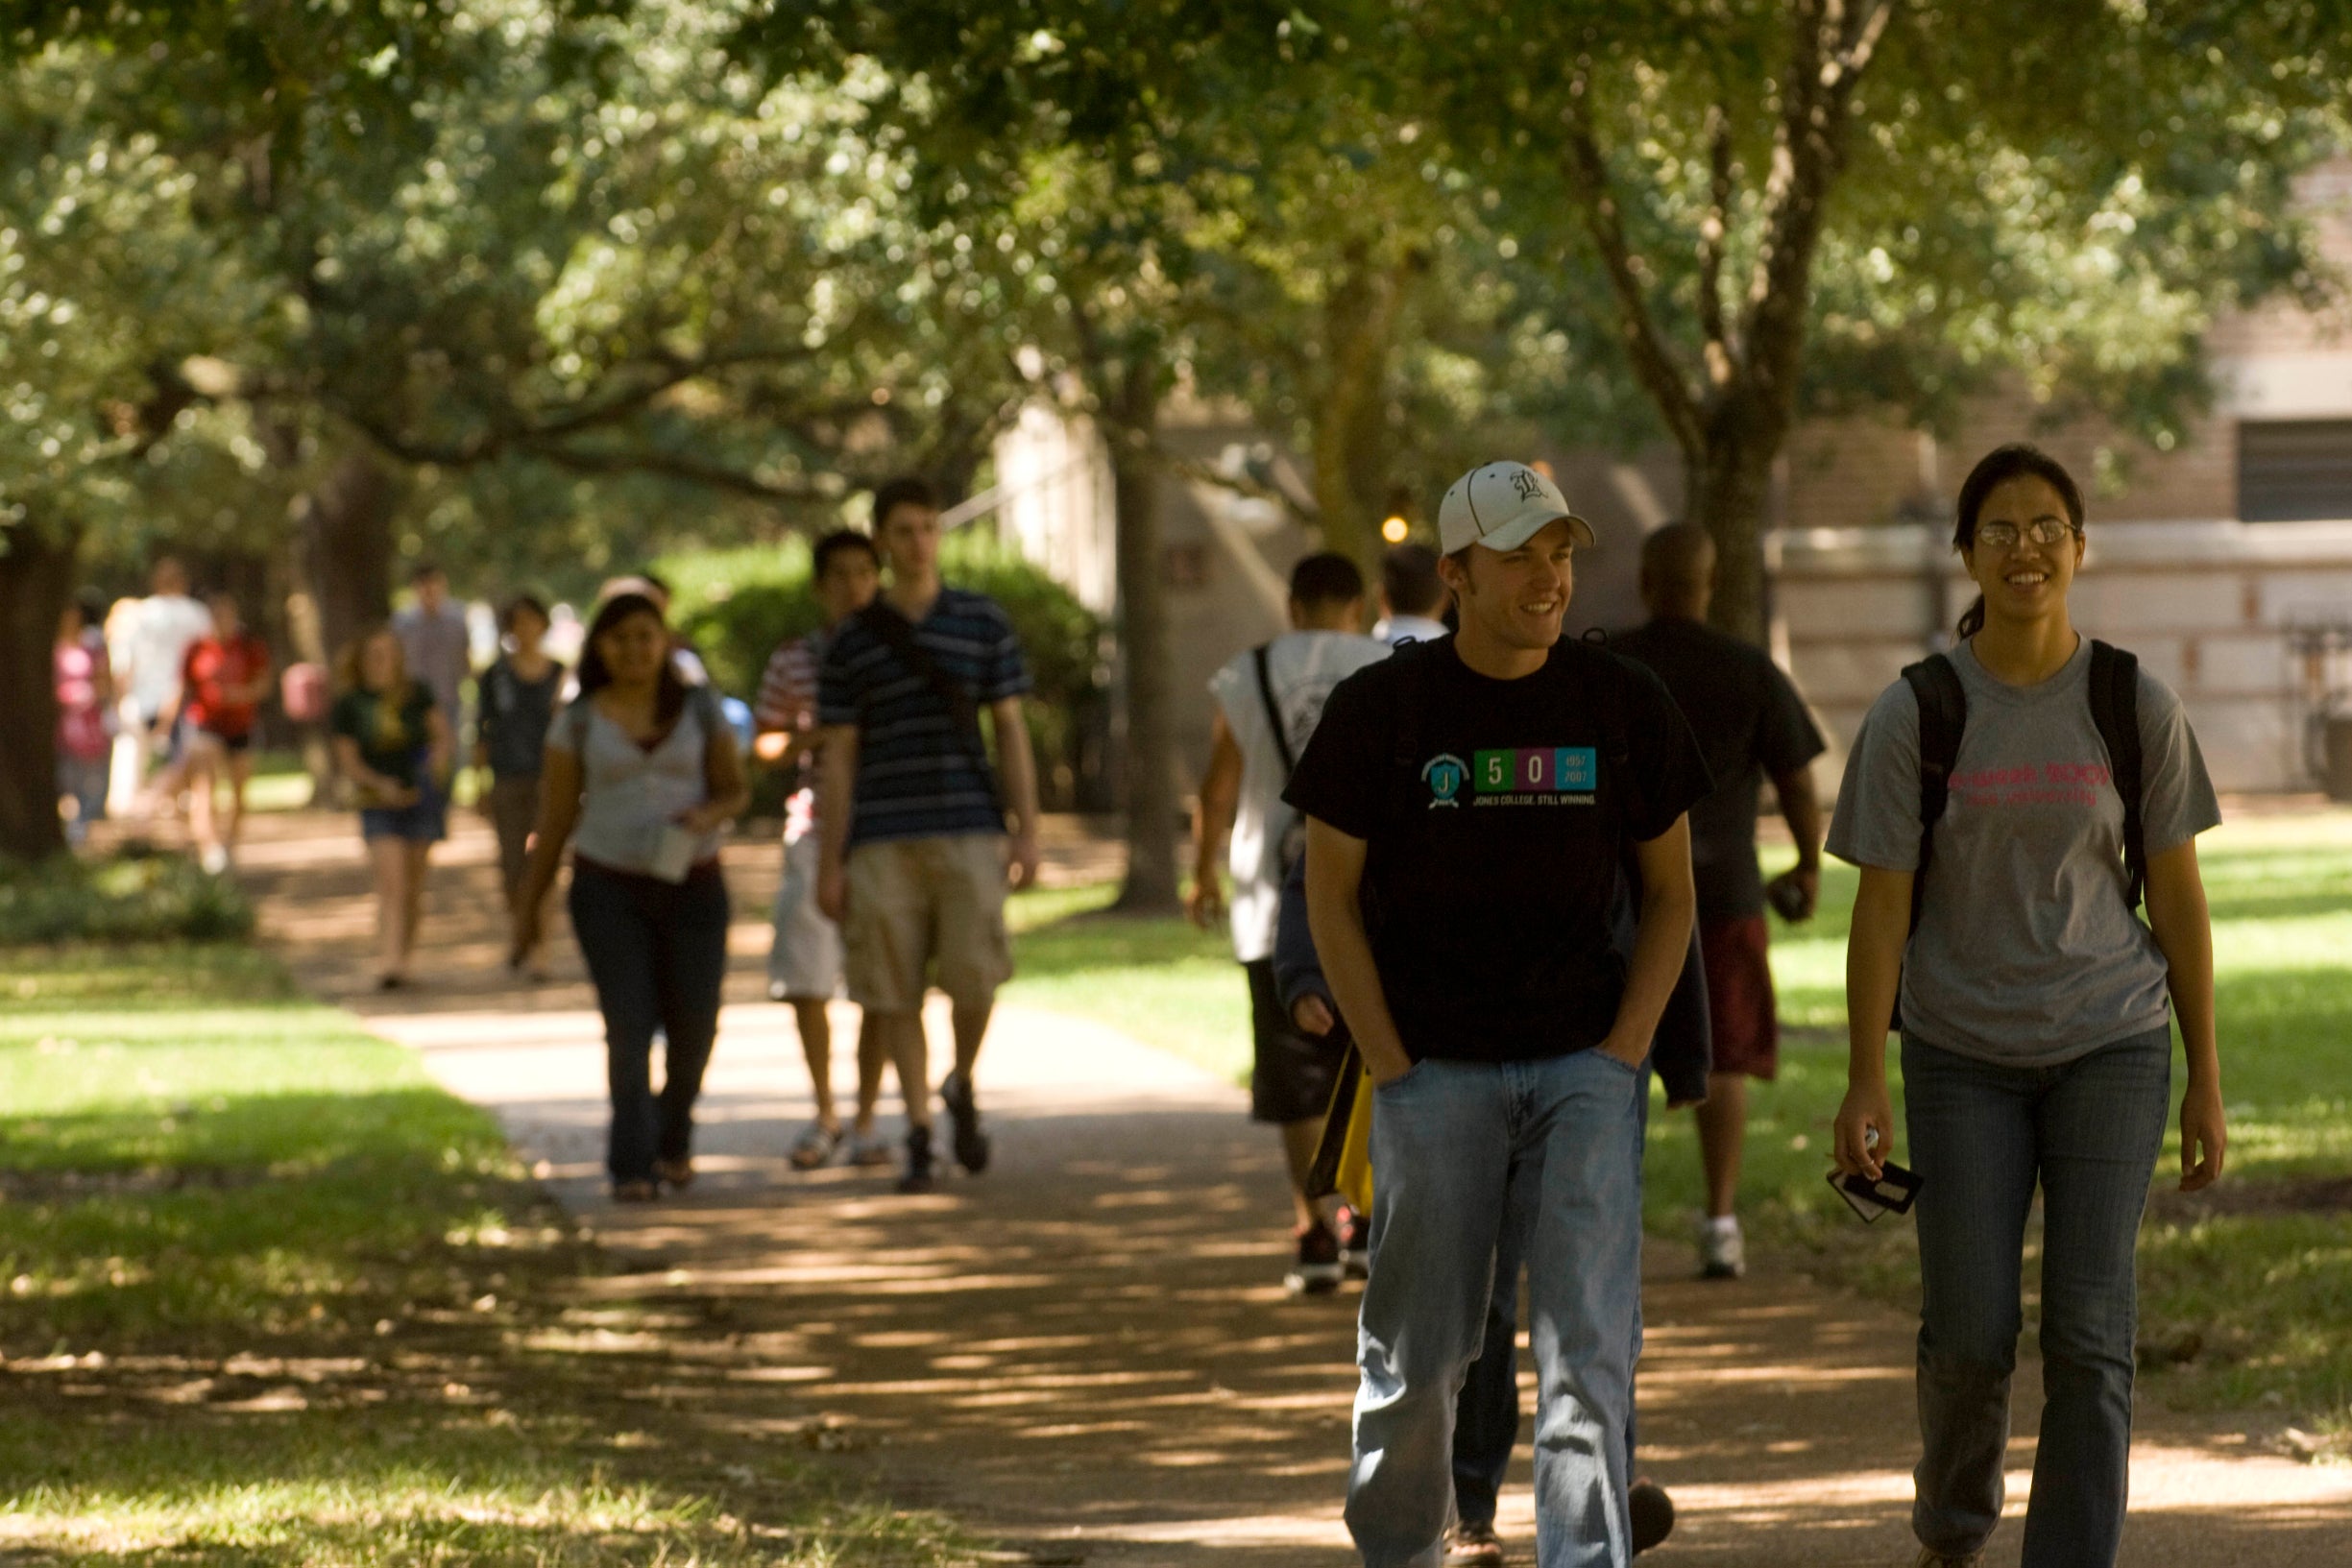 Rice Students walking on campus